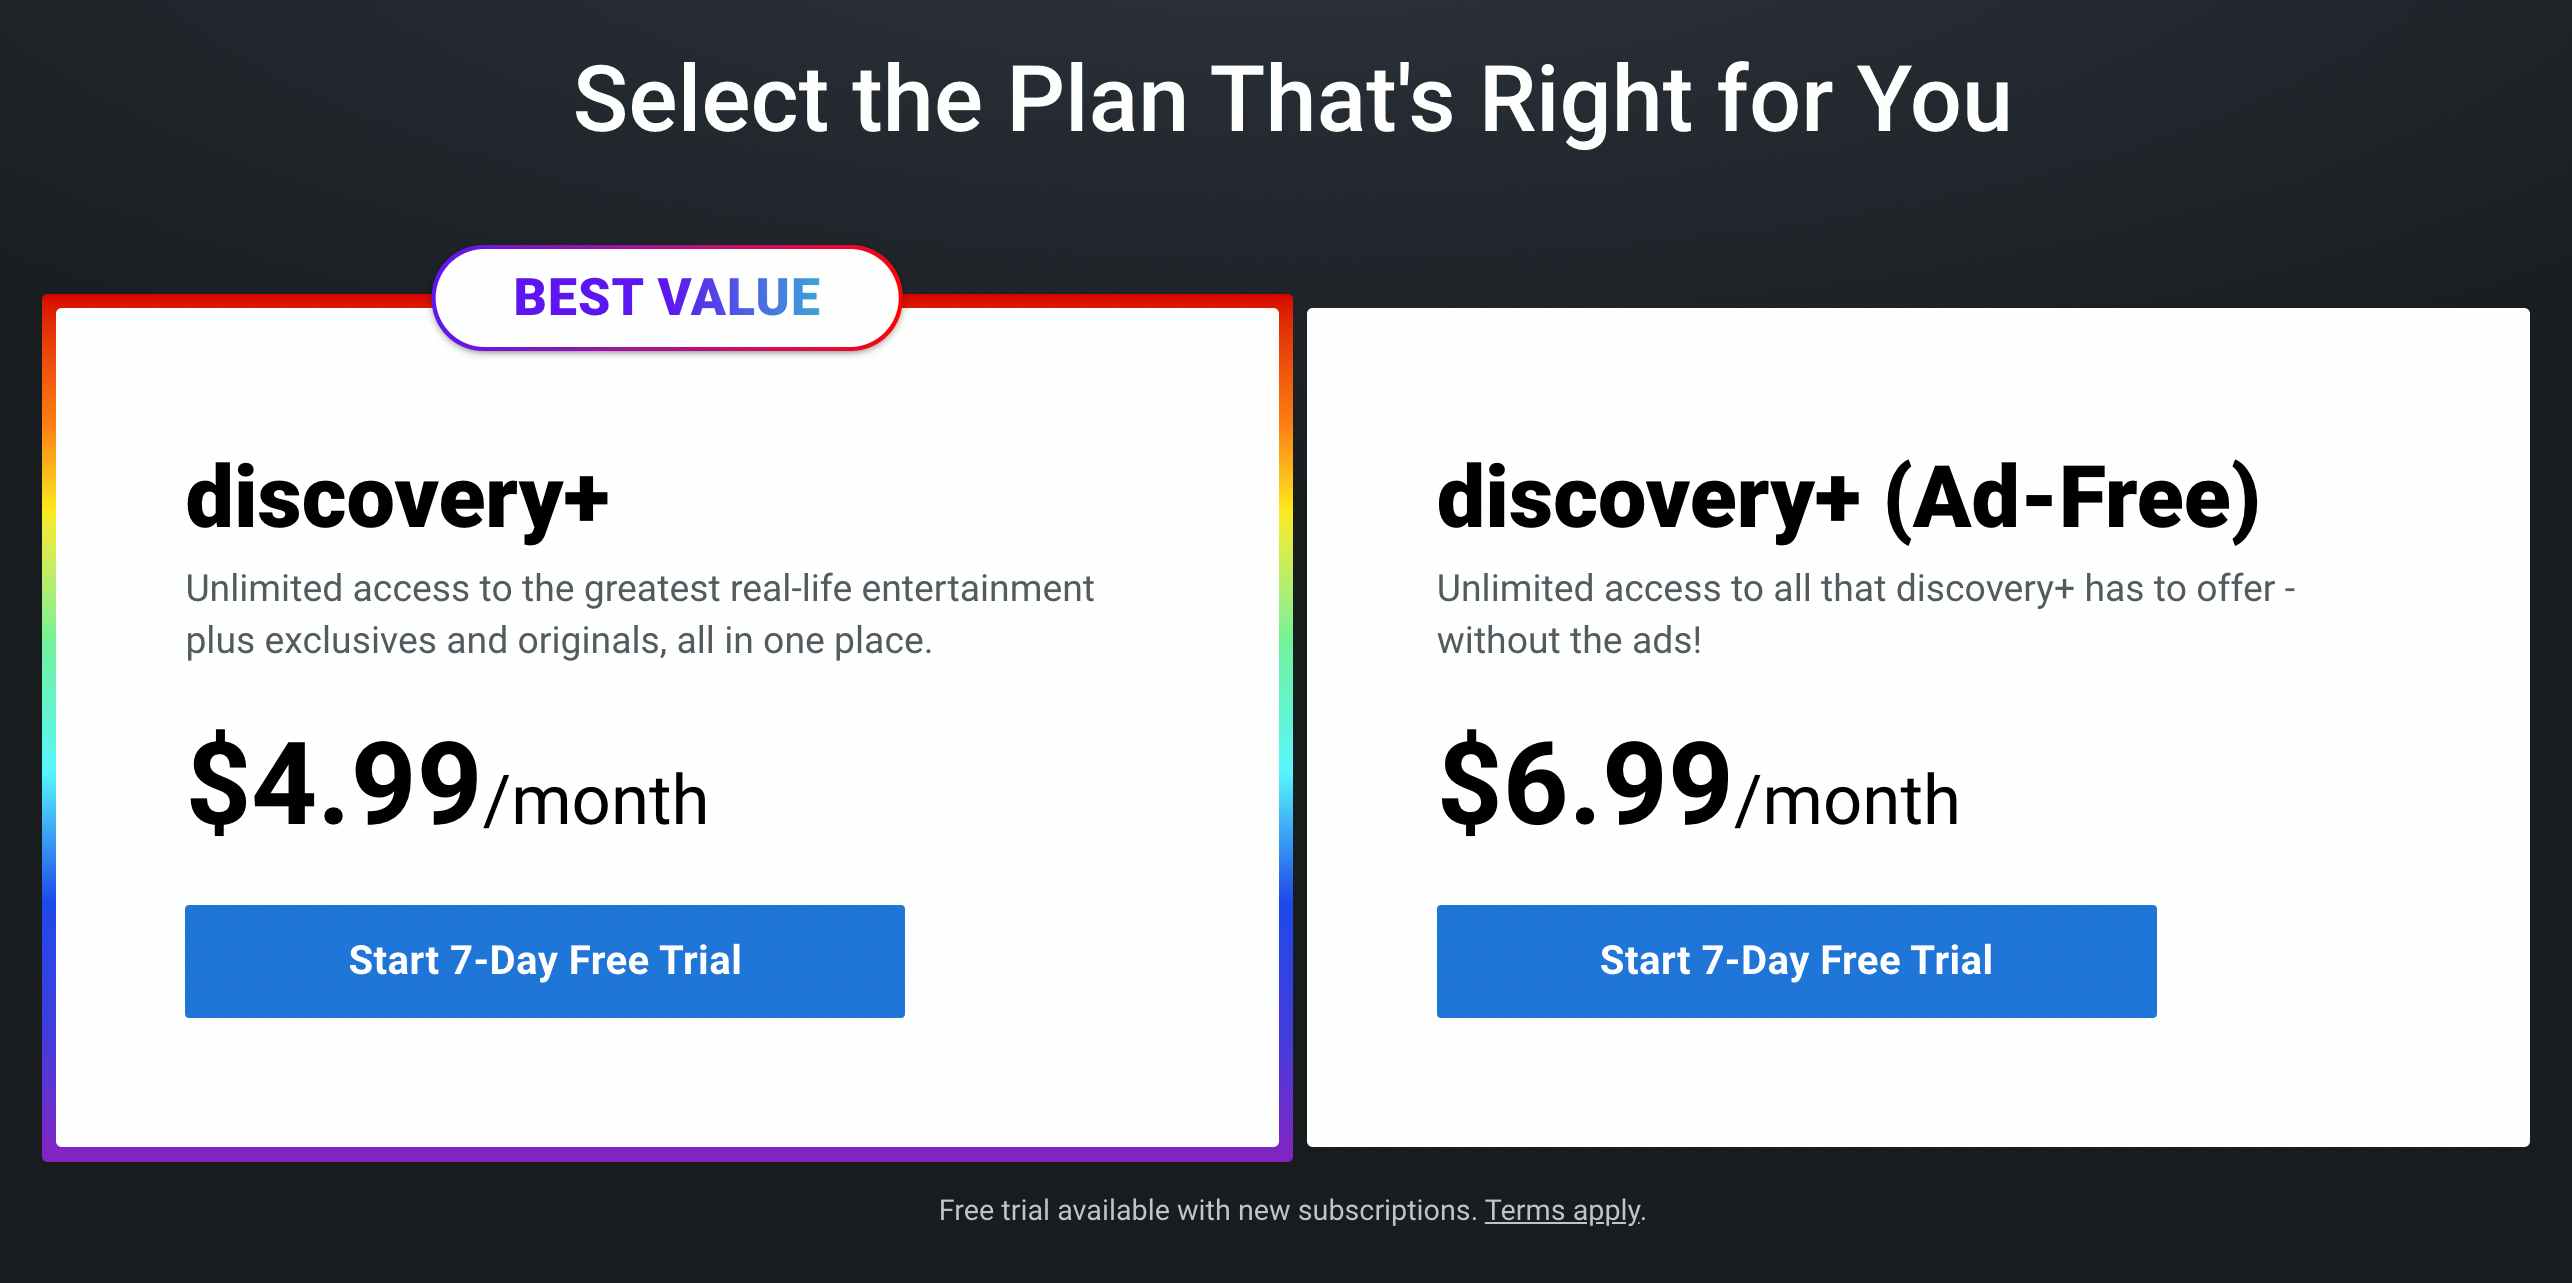 Discovery Plus Subscription: Is It Worth It? - The Krazy Coupon Lady